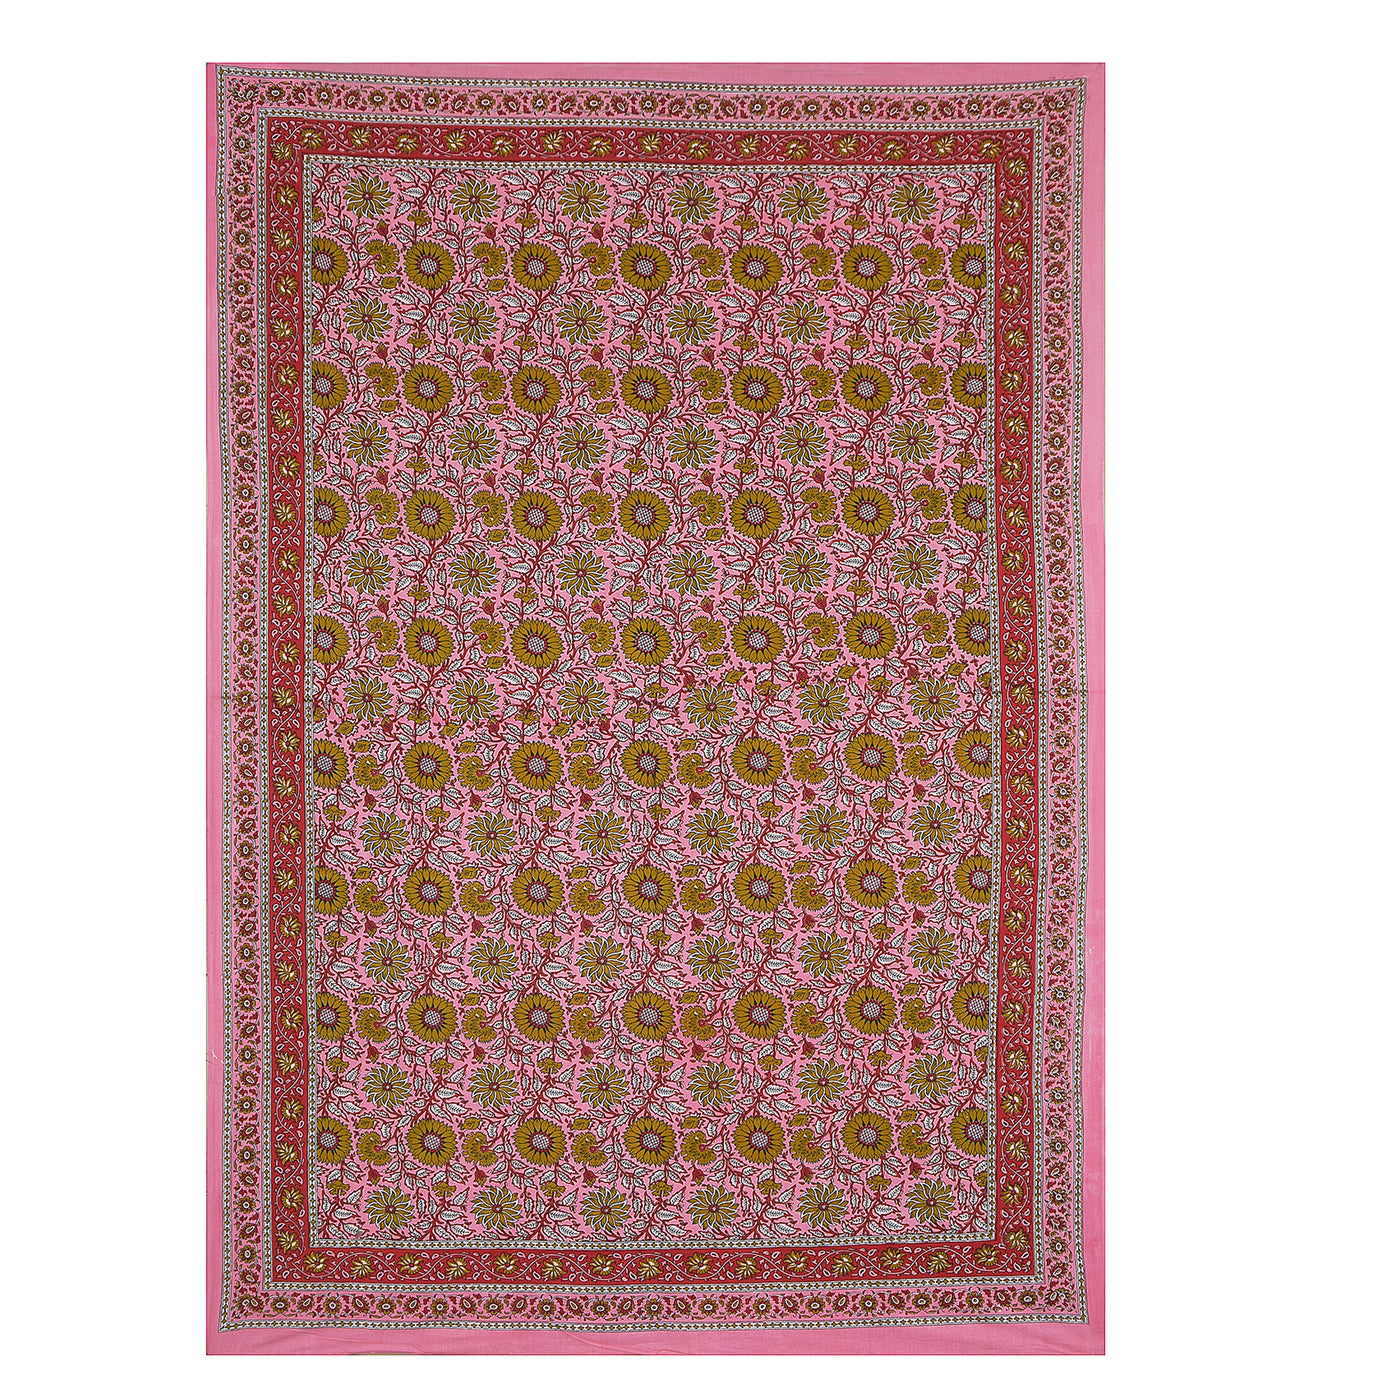 Wanderlust Premium |100% Pure Cotton | Single Bedsheet with 1 Pillow Cover (Rajasthani Floral Design)